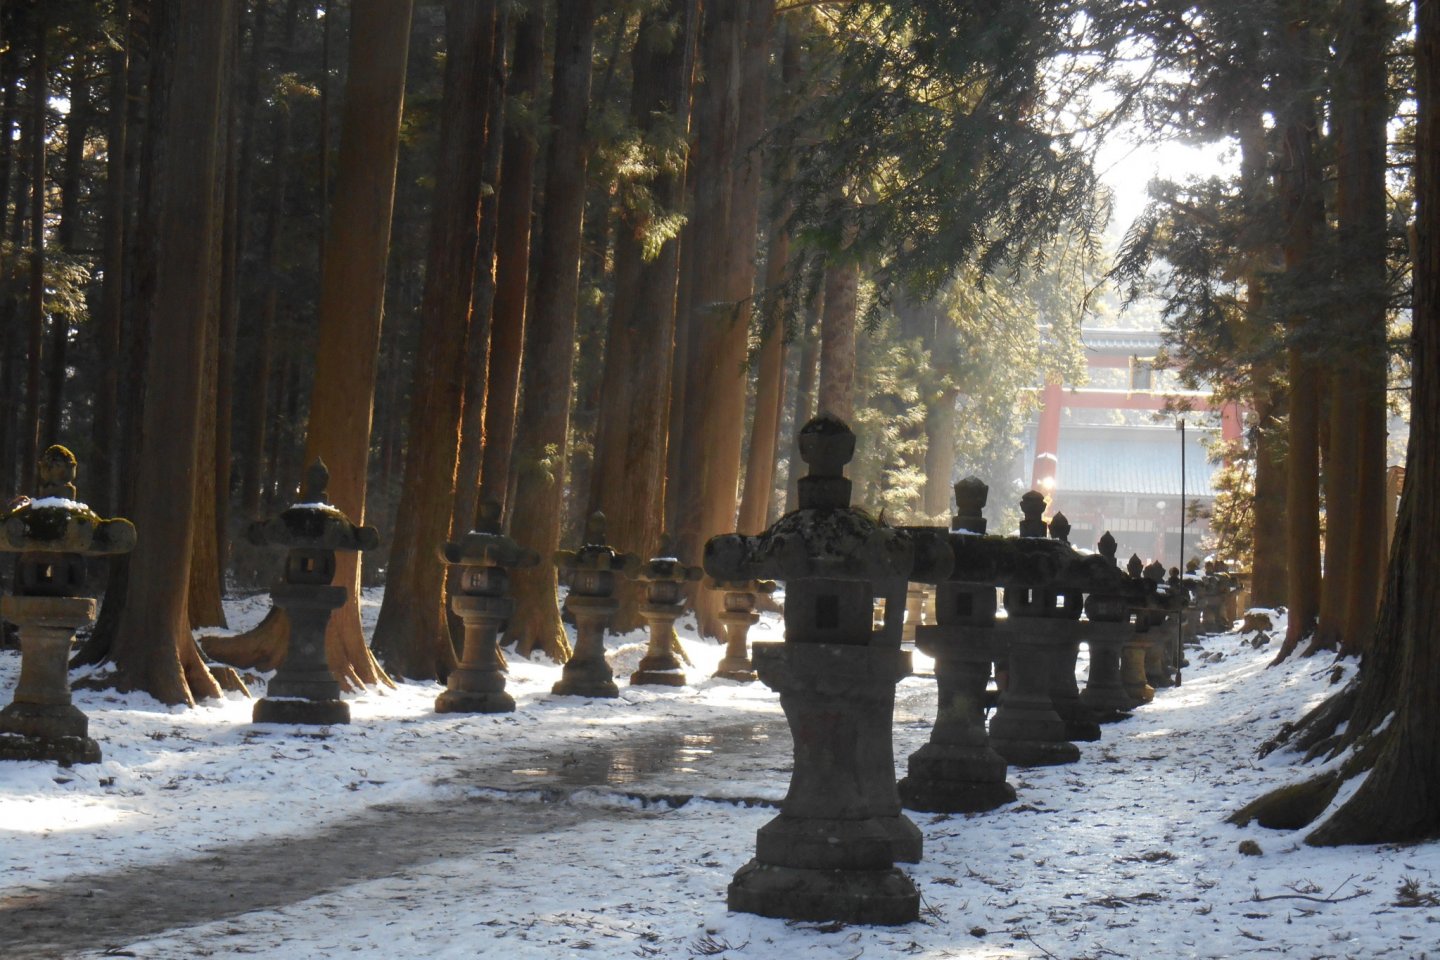 The approach to the shrine is lined with stone lanterns.